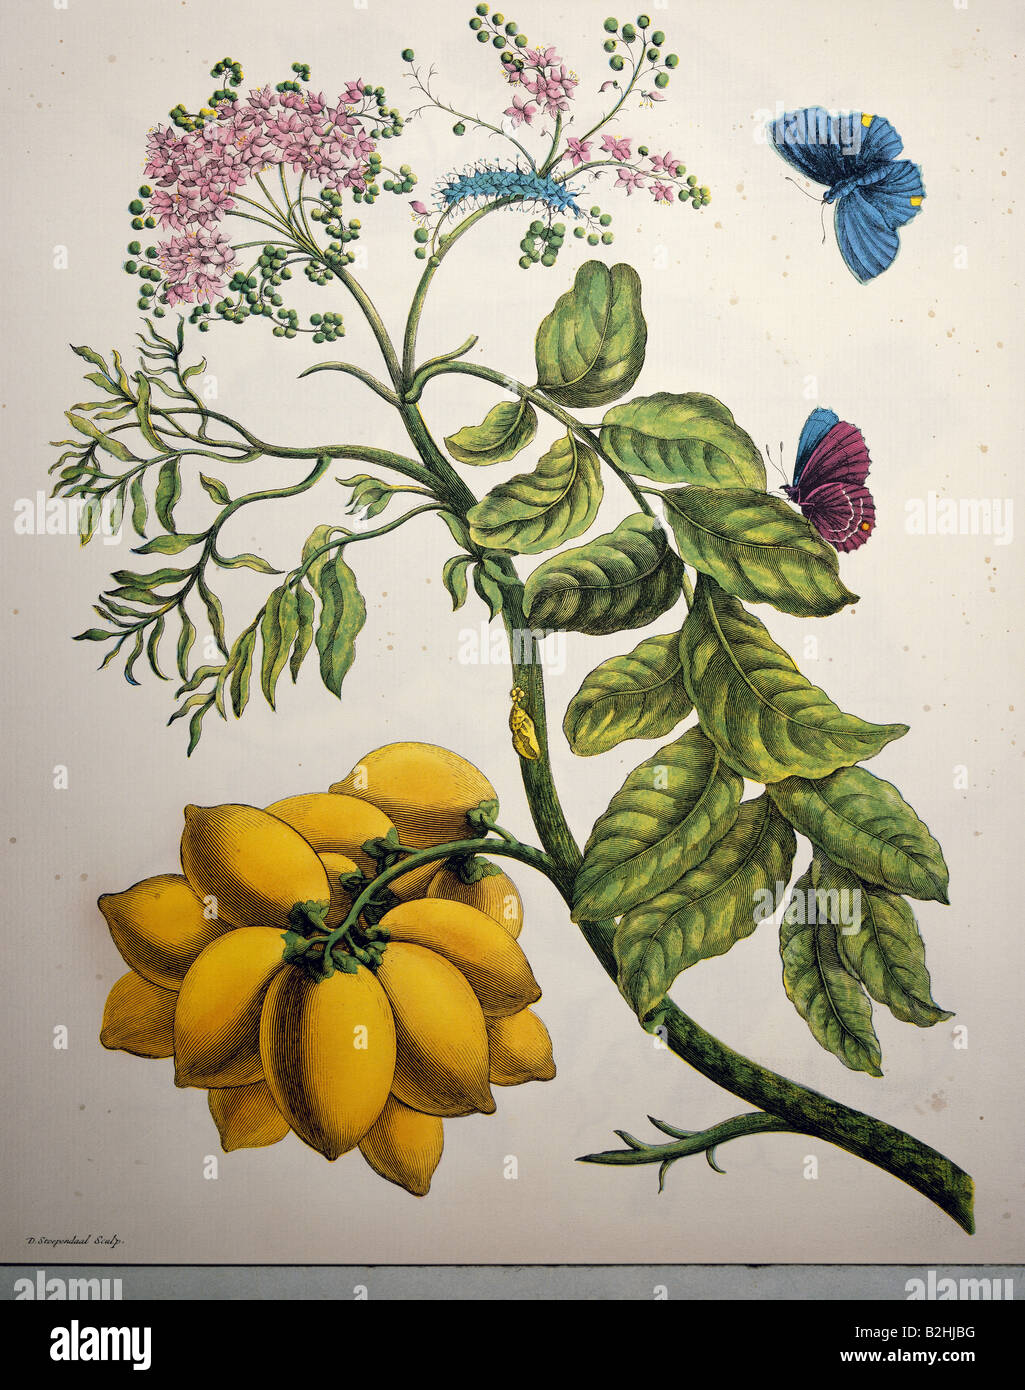 zoology, insect, butterfly, caterpillar, cocoon, blooming plant, copper engraving, watercoloured, from 'Metamorphosis insectorum Surinamensium', by Maria Sibylla Merian (1647 - 1717), Amsterdam, Netherlands, 1705, private collection, Artist's Copyright has not to be cleared Stock Photo